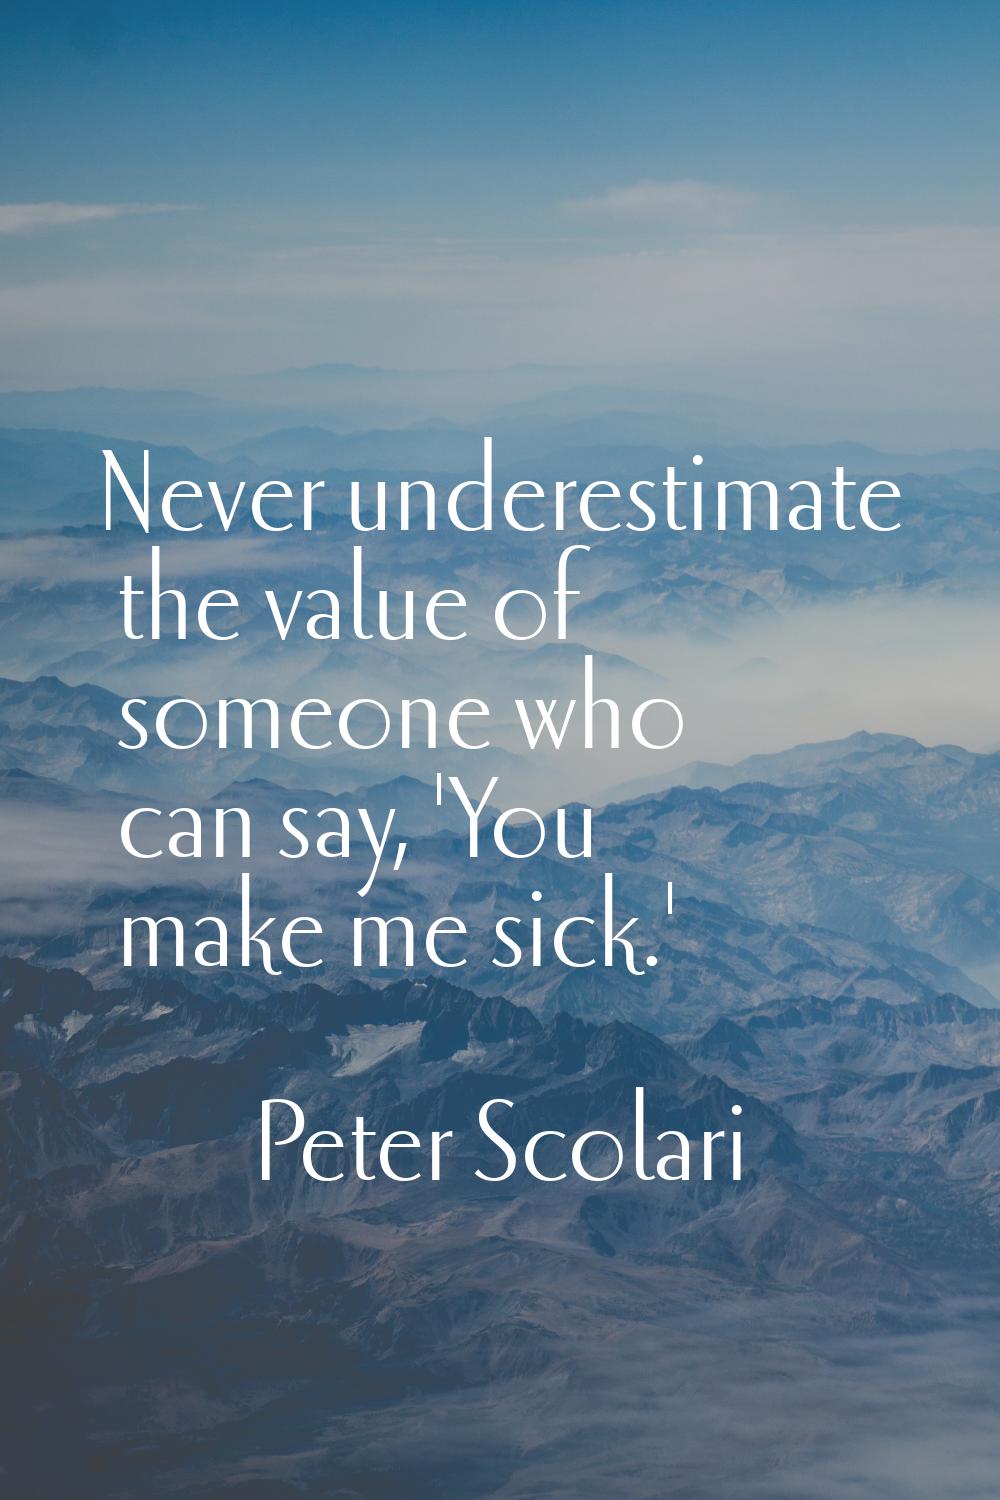 Never underestimate the value of someone who can say, 'You make me sick.'